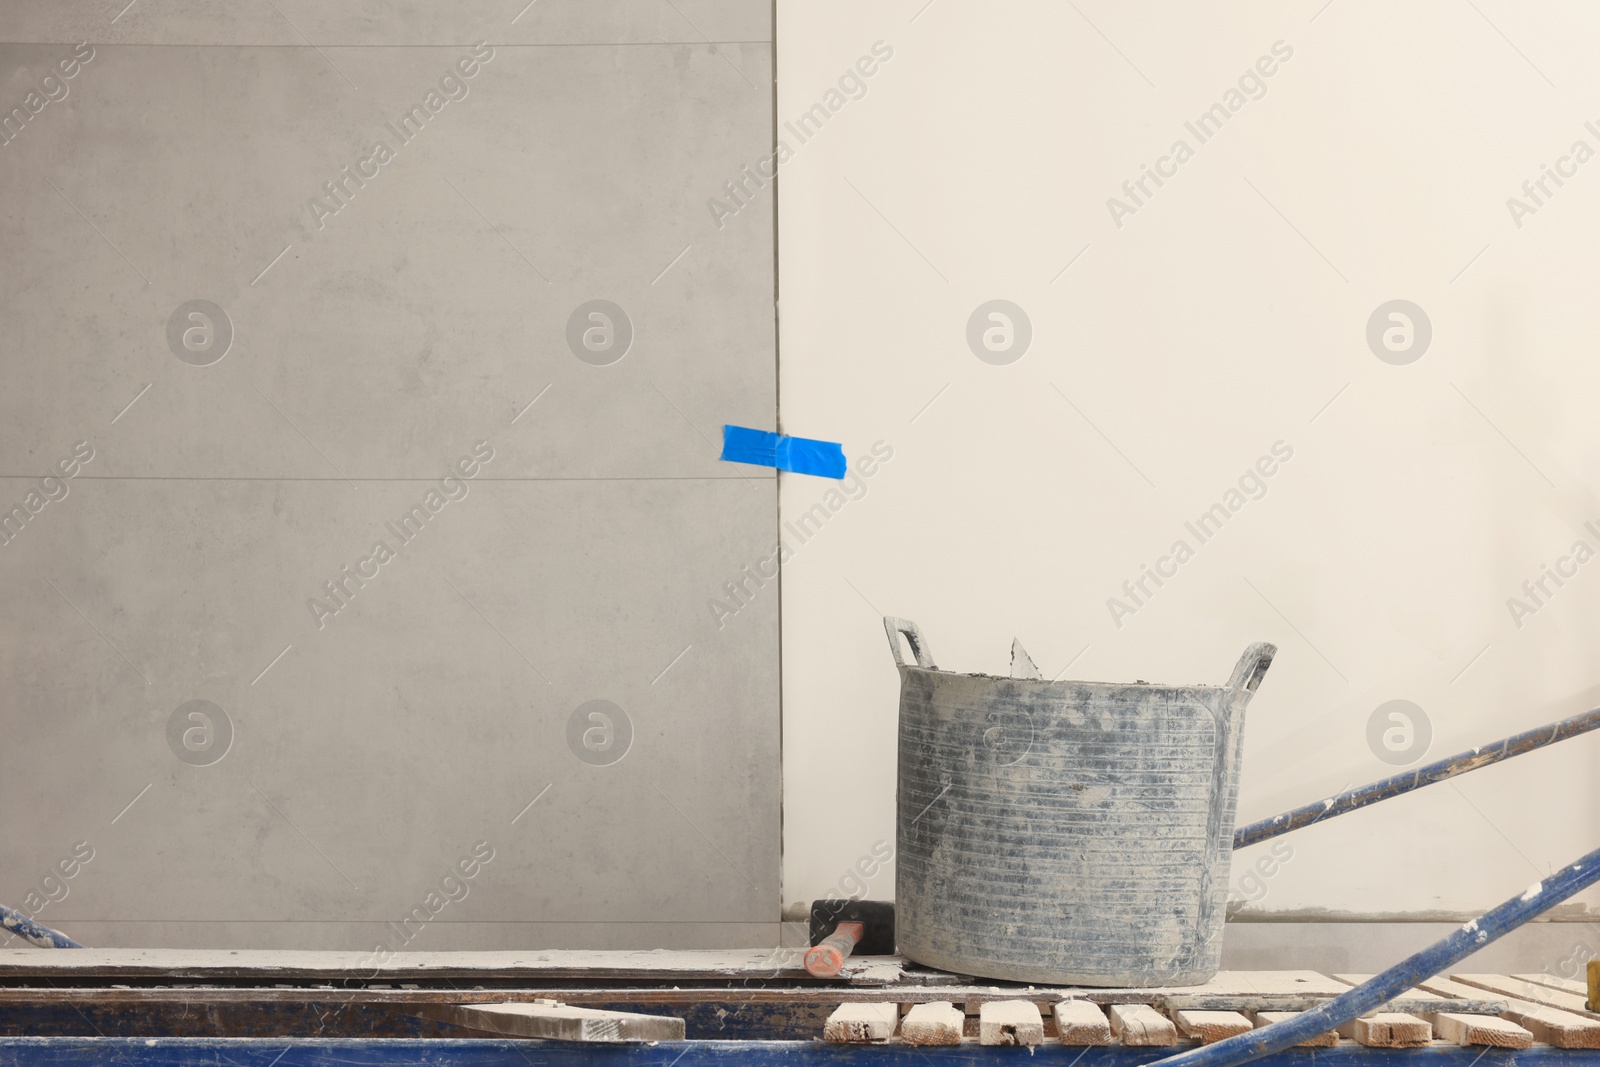 Photo of Different tools on tower tour near white wall with adhesive mix and tiles indoors